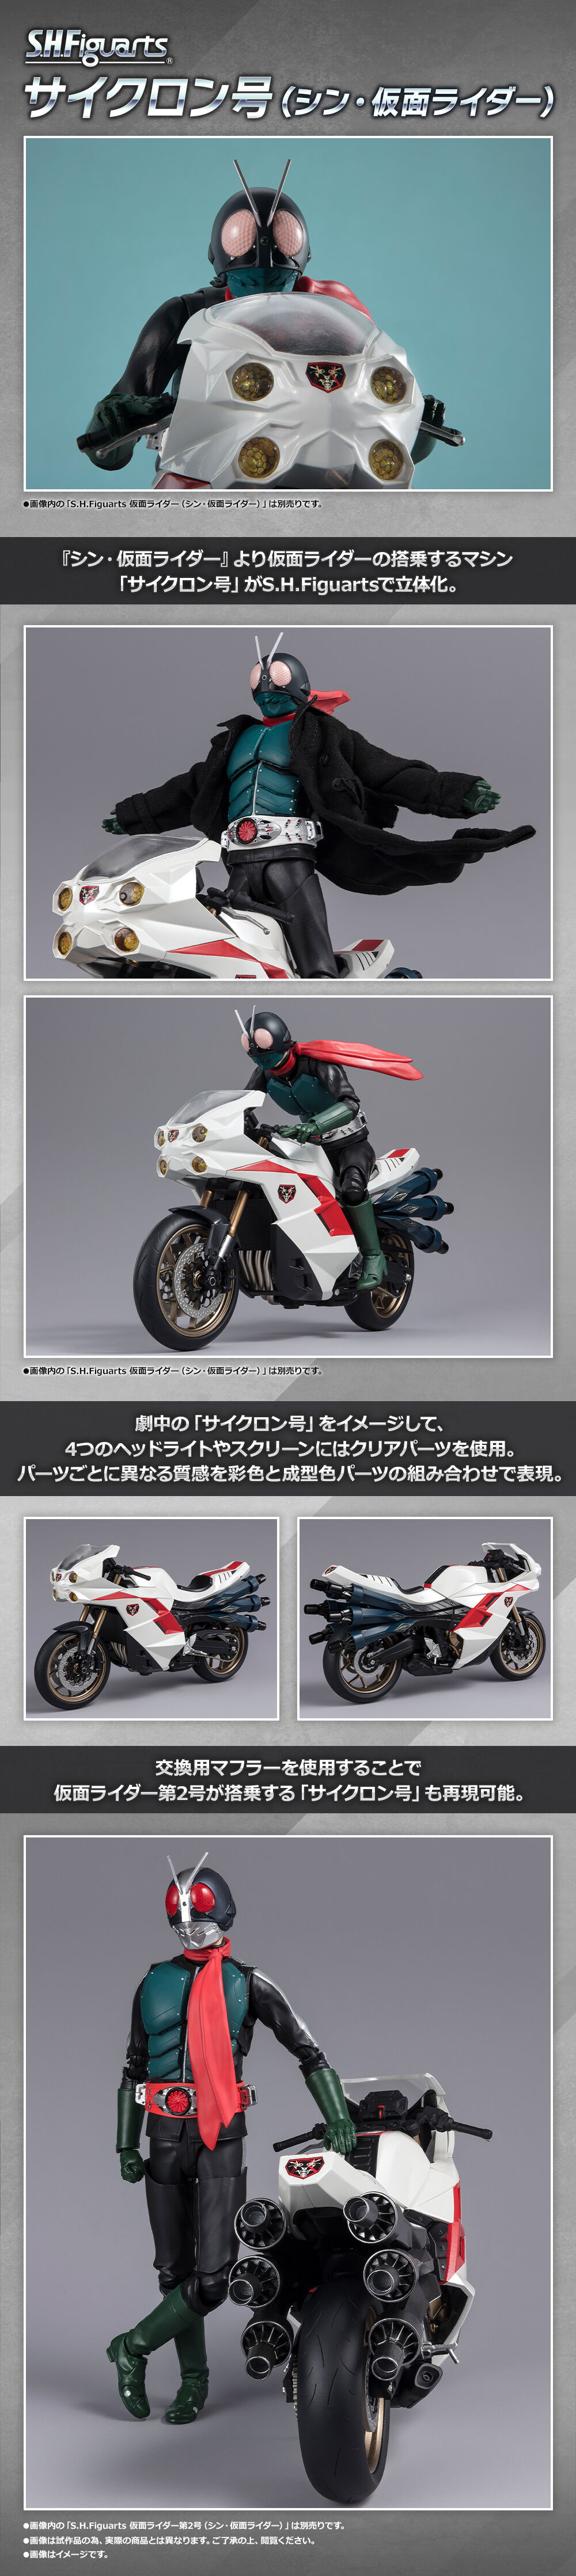 S.H.Figuarts サイクロン号（シン・仮面ライダー）【2次：2023年11月 